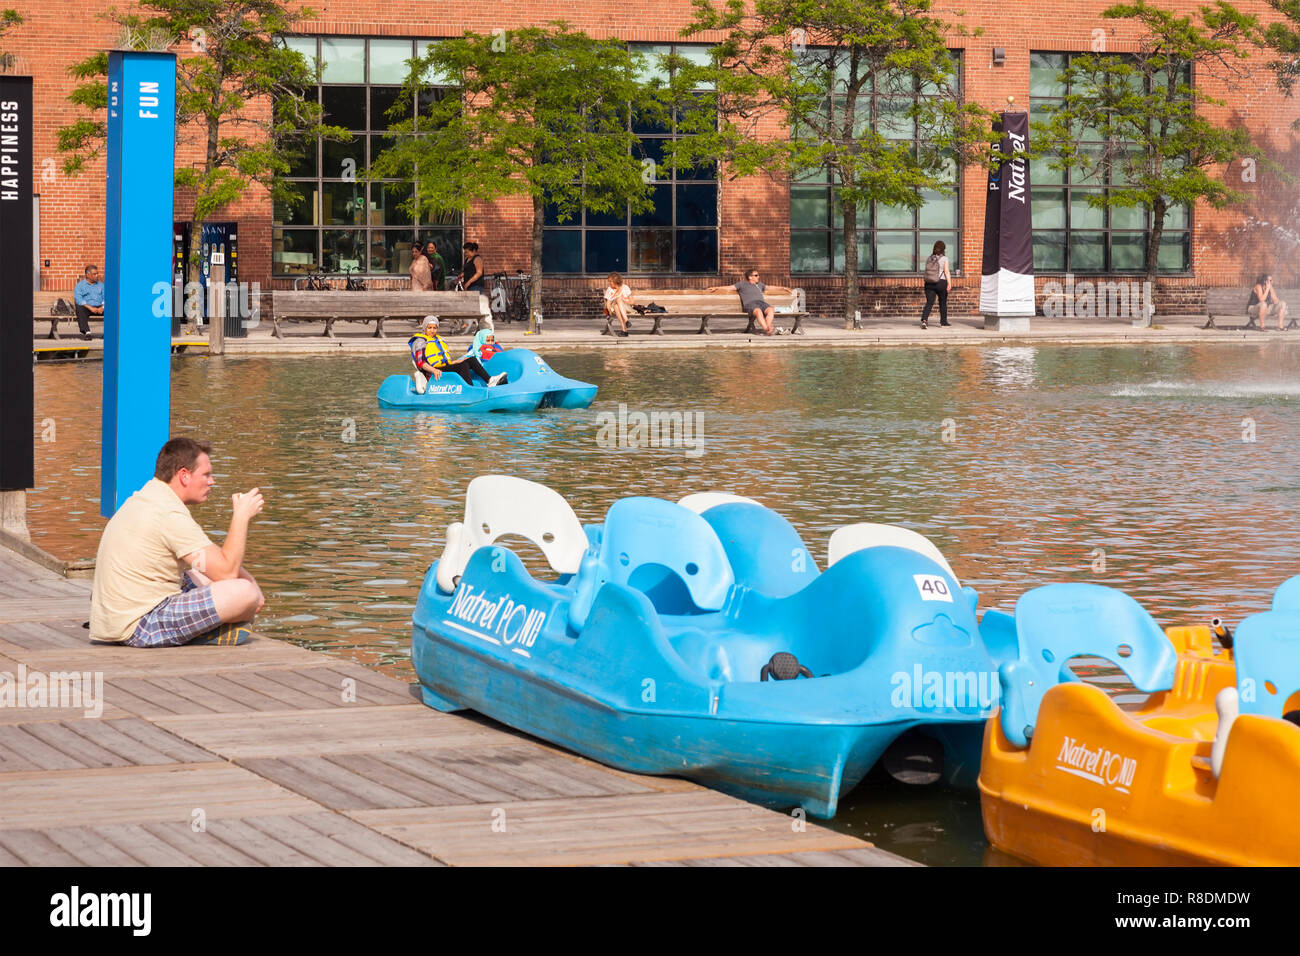 Pedalos or paddle boats on Natrel Pond at the Harbourfront Centre. City of Toronto, Ontario, Canada. Stock Photo